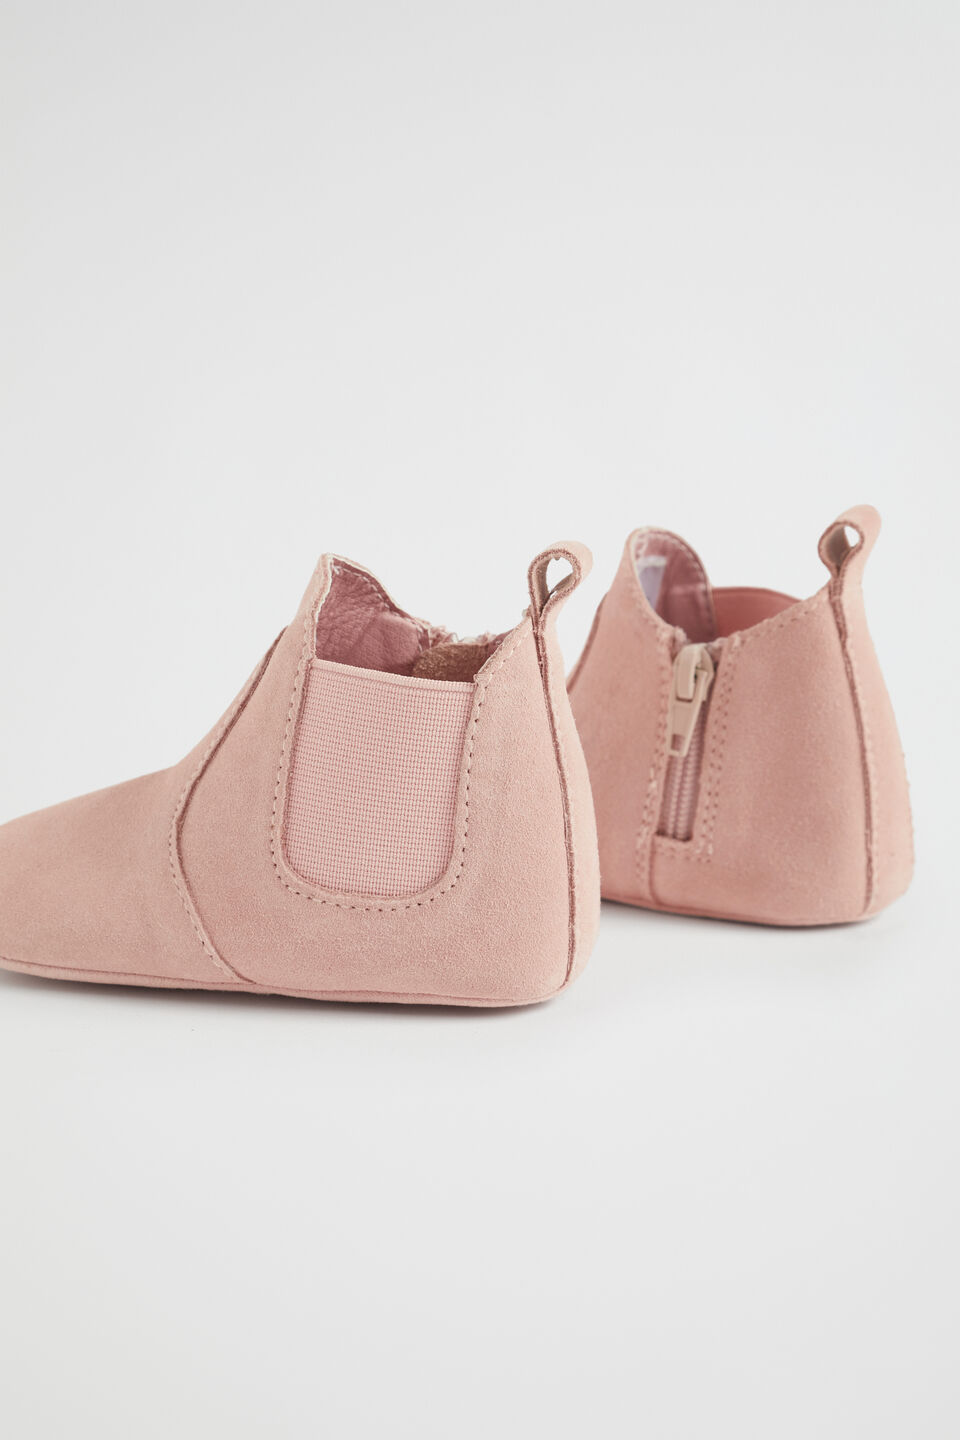 Suede Gusset Bootie  Dusty Rose